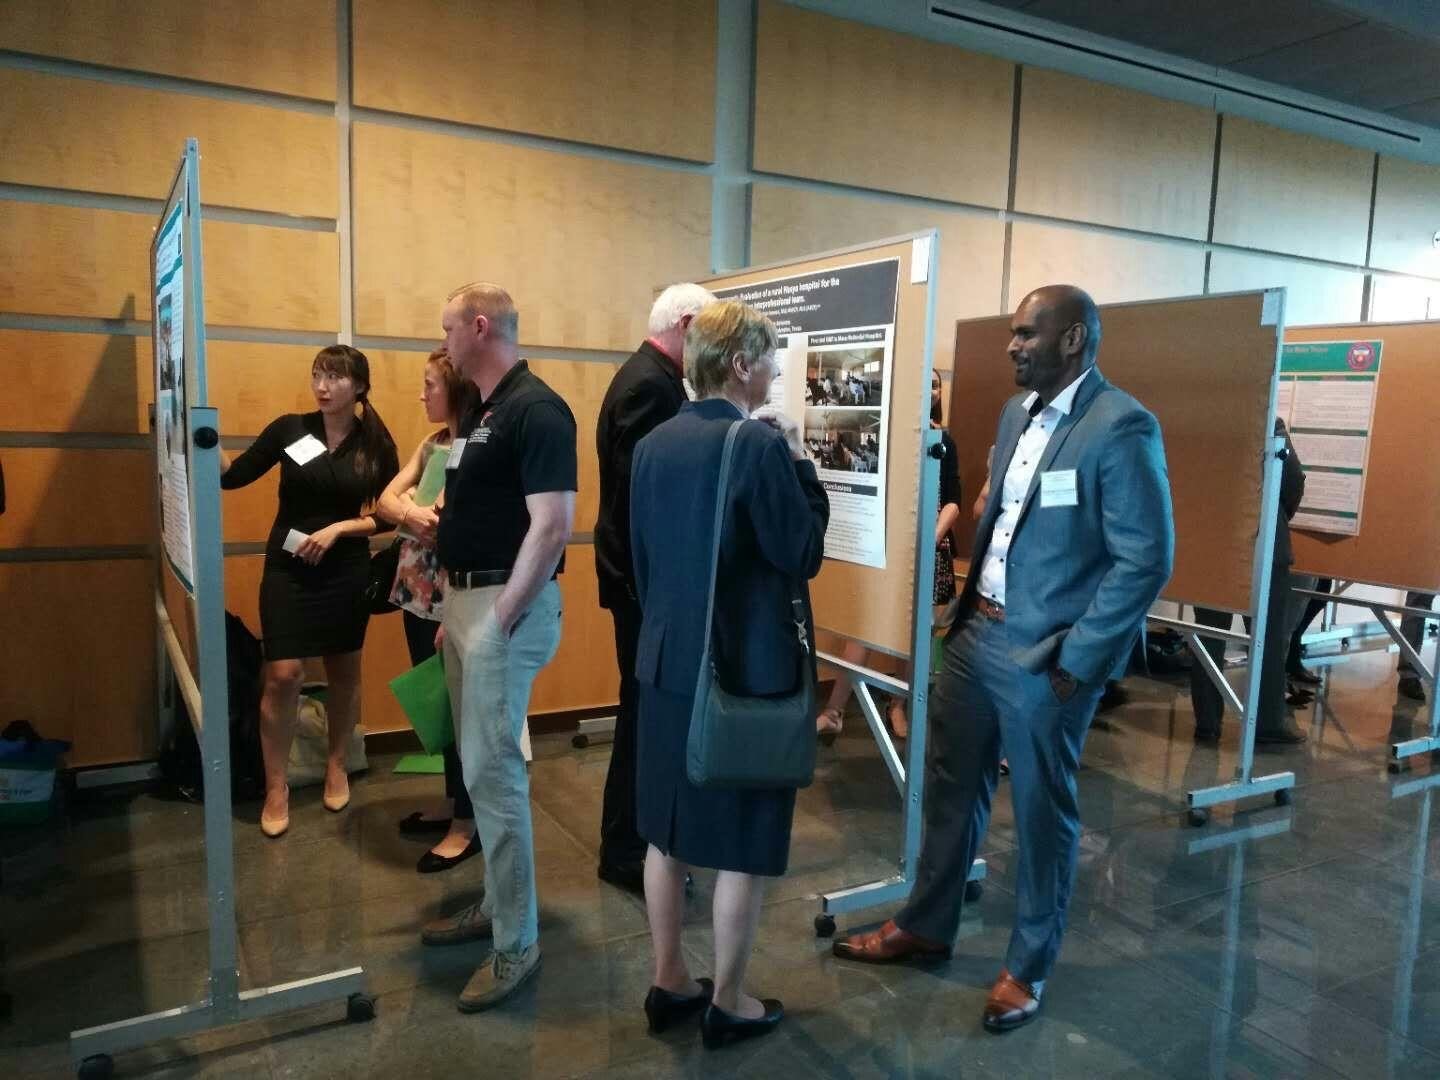 Dr. Raj Rajendran addressing conference guests in front of his poster